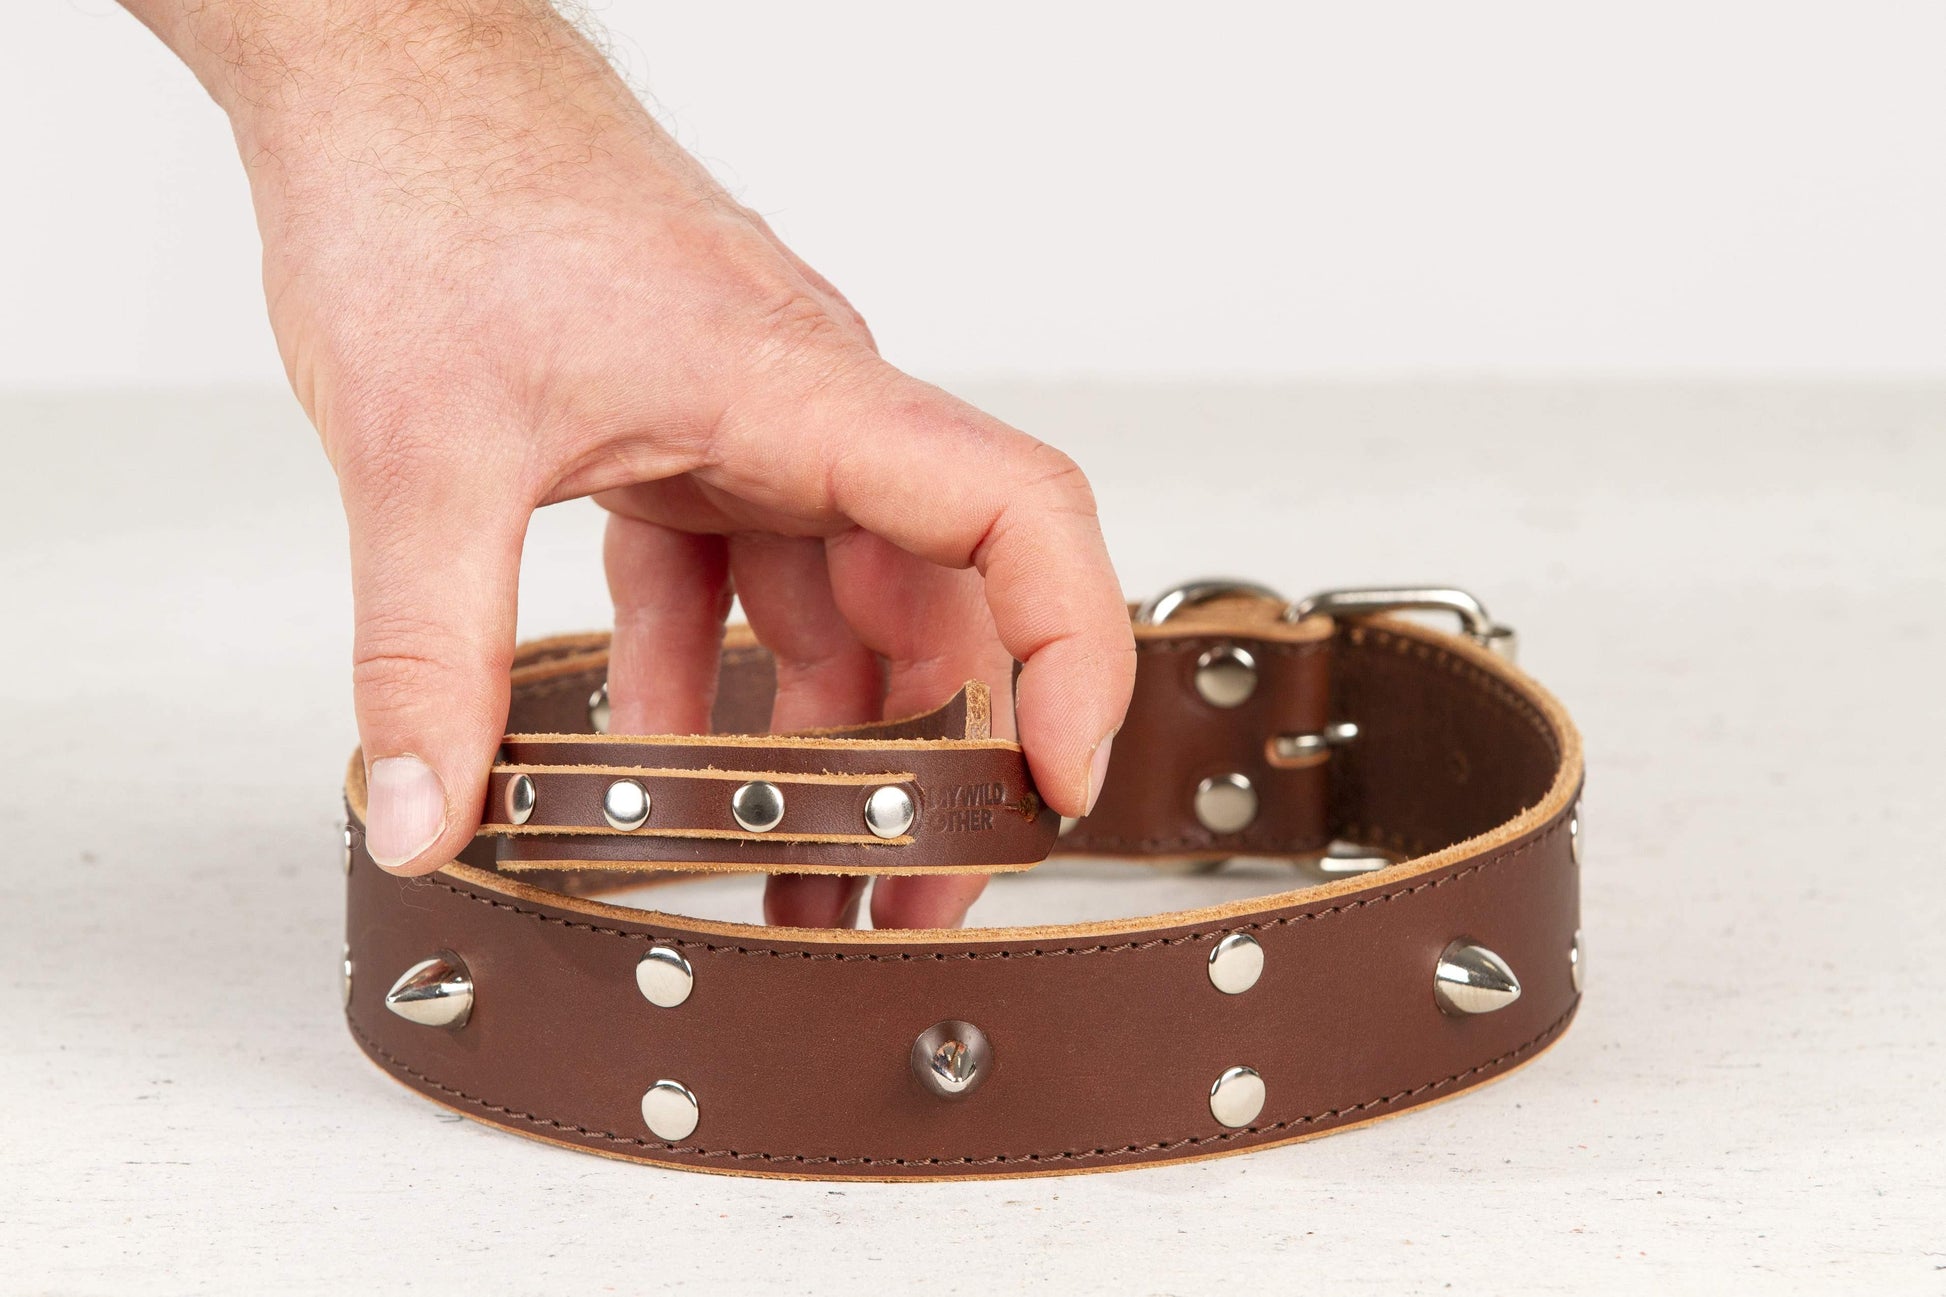 Handmade brown leather STUDDED dog collar - premium dog goods handmade in Europe by My Wild Other